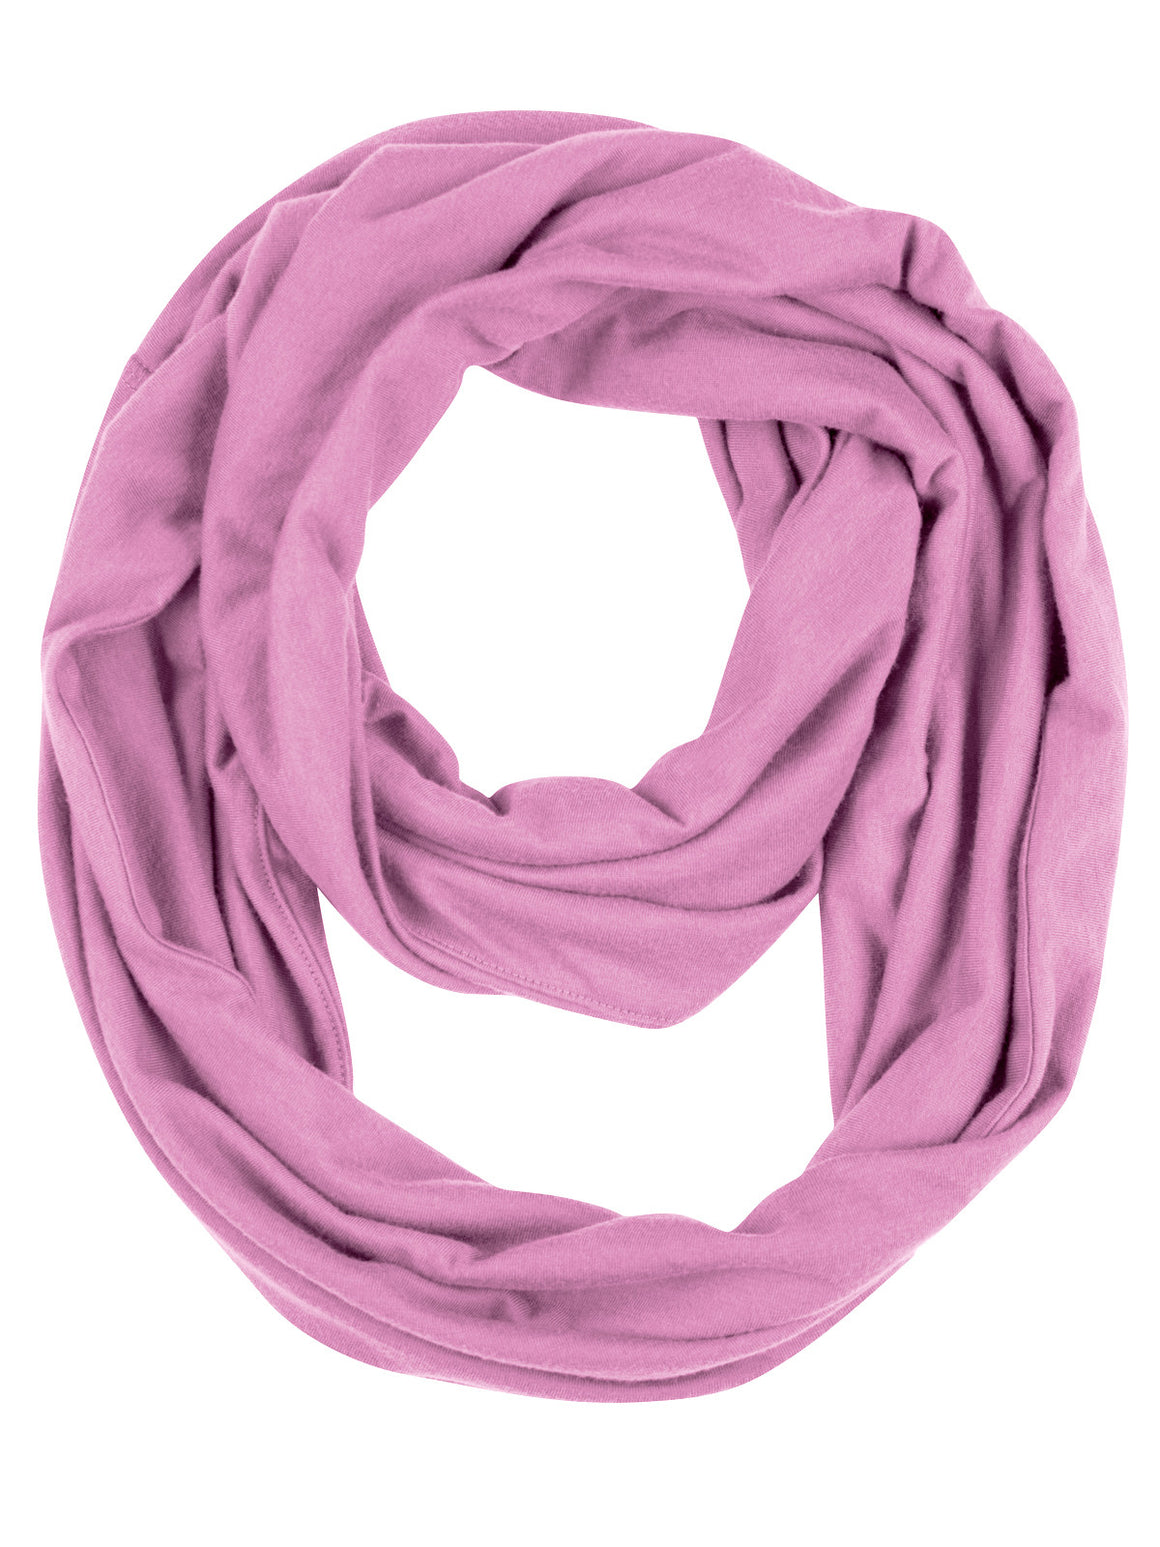 Infinity Scarf - Ice Pink